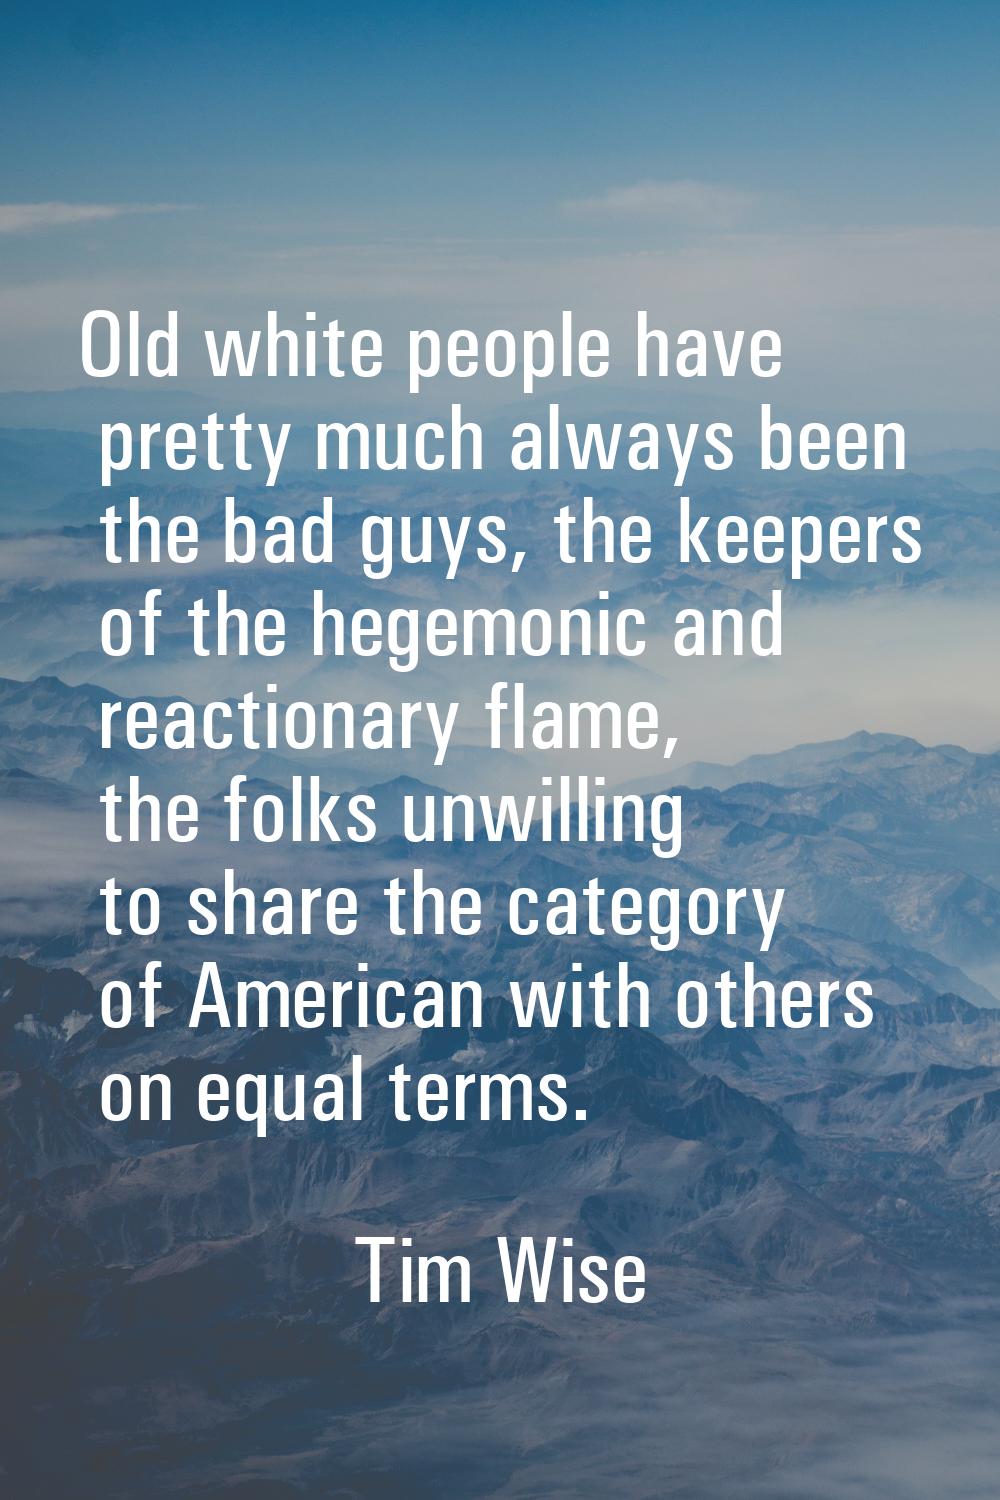 Old white people have pretty much always been the bad guys, the keepers of the hegemonic and reacti